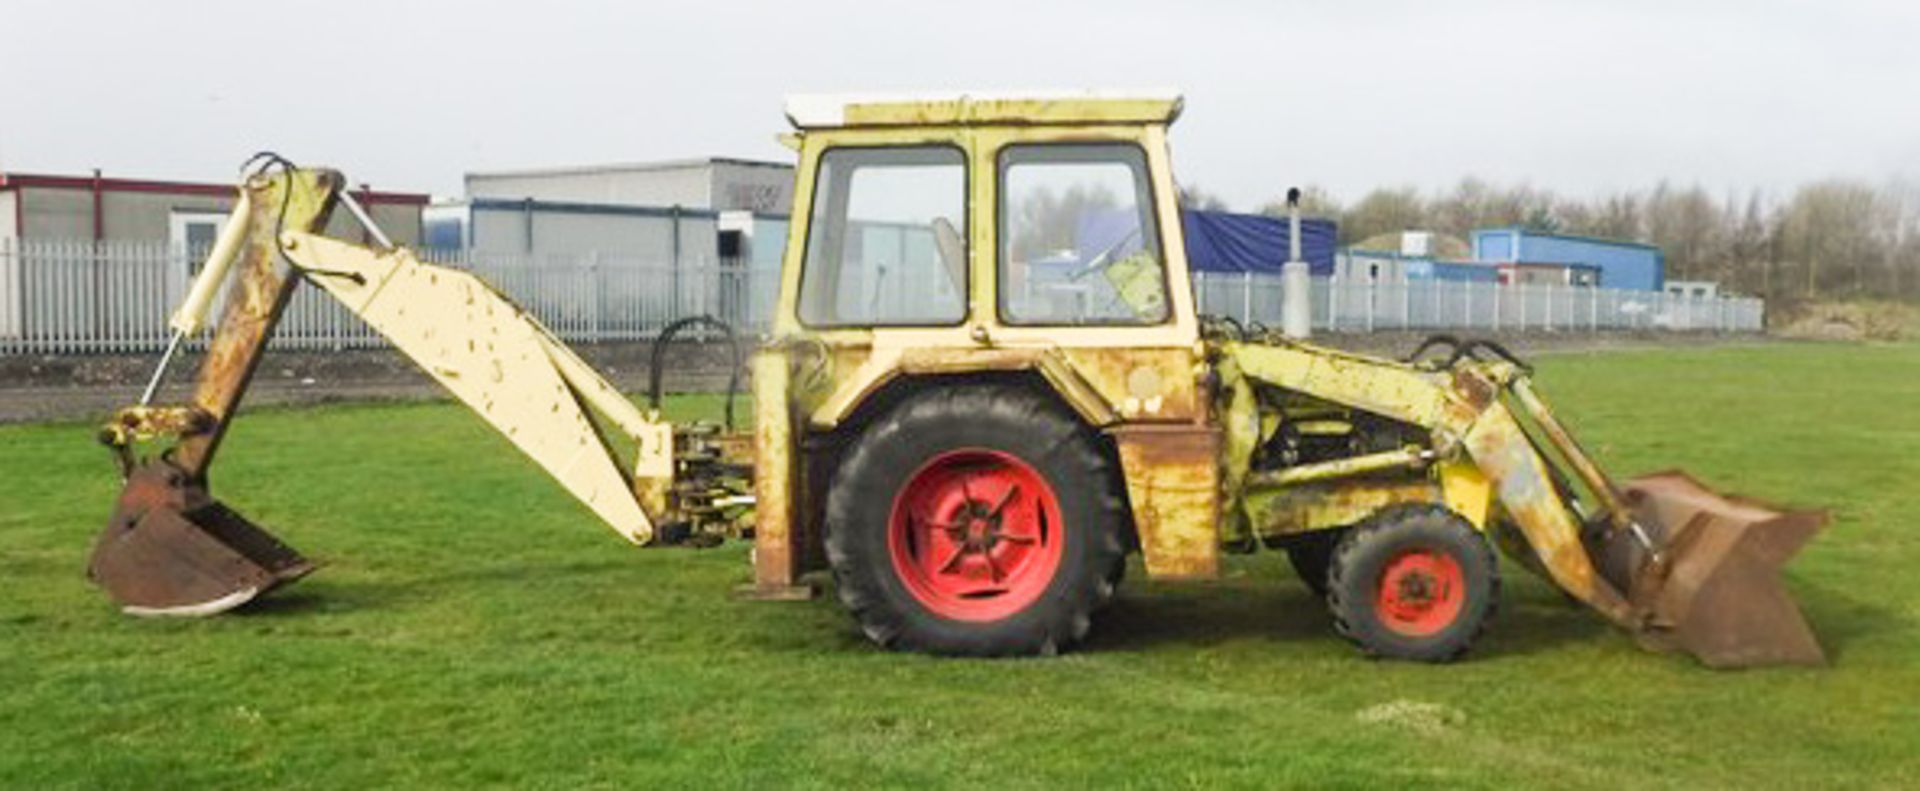 1972/1973 HYMAC 270 BACKHOE LOADER, SN 207-270, 4182 HOURS (NOT VERIFIED), ENGINE NO C407354, CHASSI - Image 4 of 11